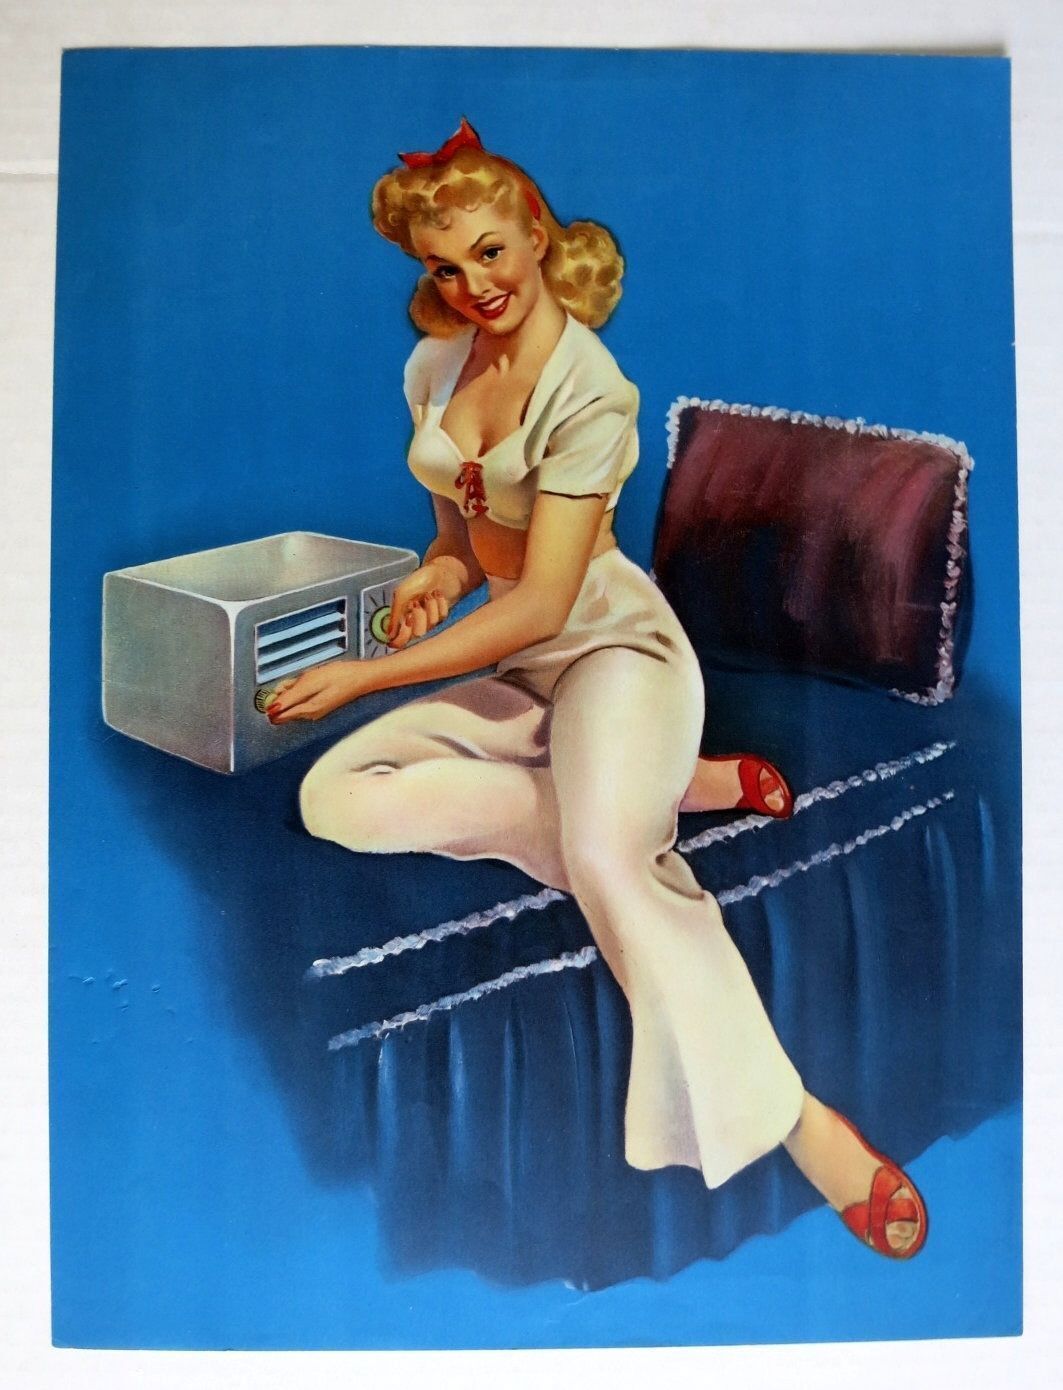 Authentic 1940-50s Pinup Girl Picture  Young Blond Girl Adjusting Radio on Bed